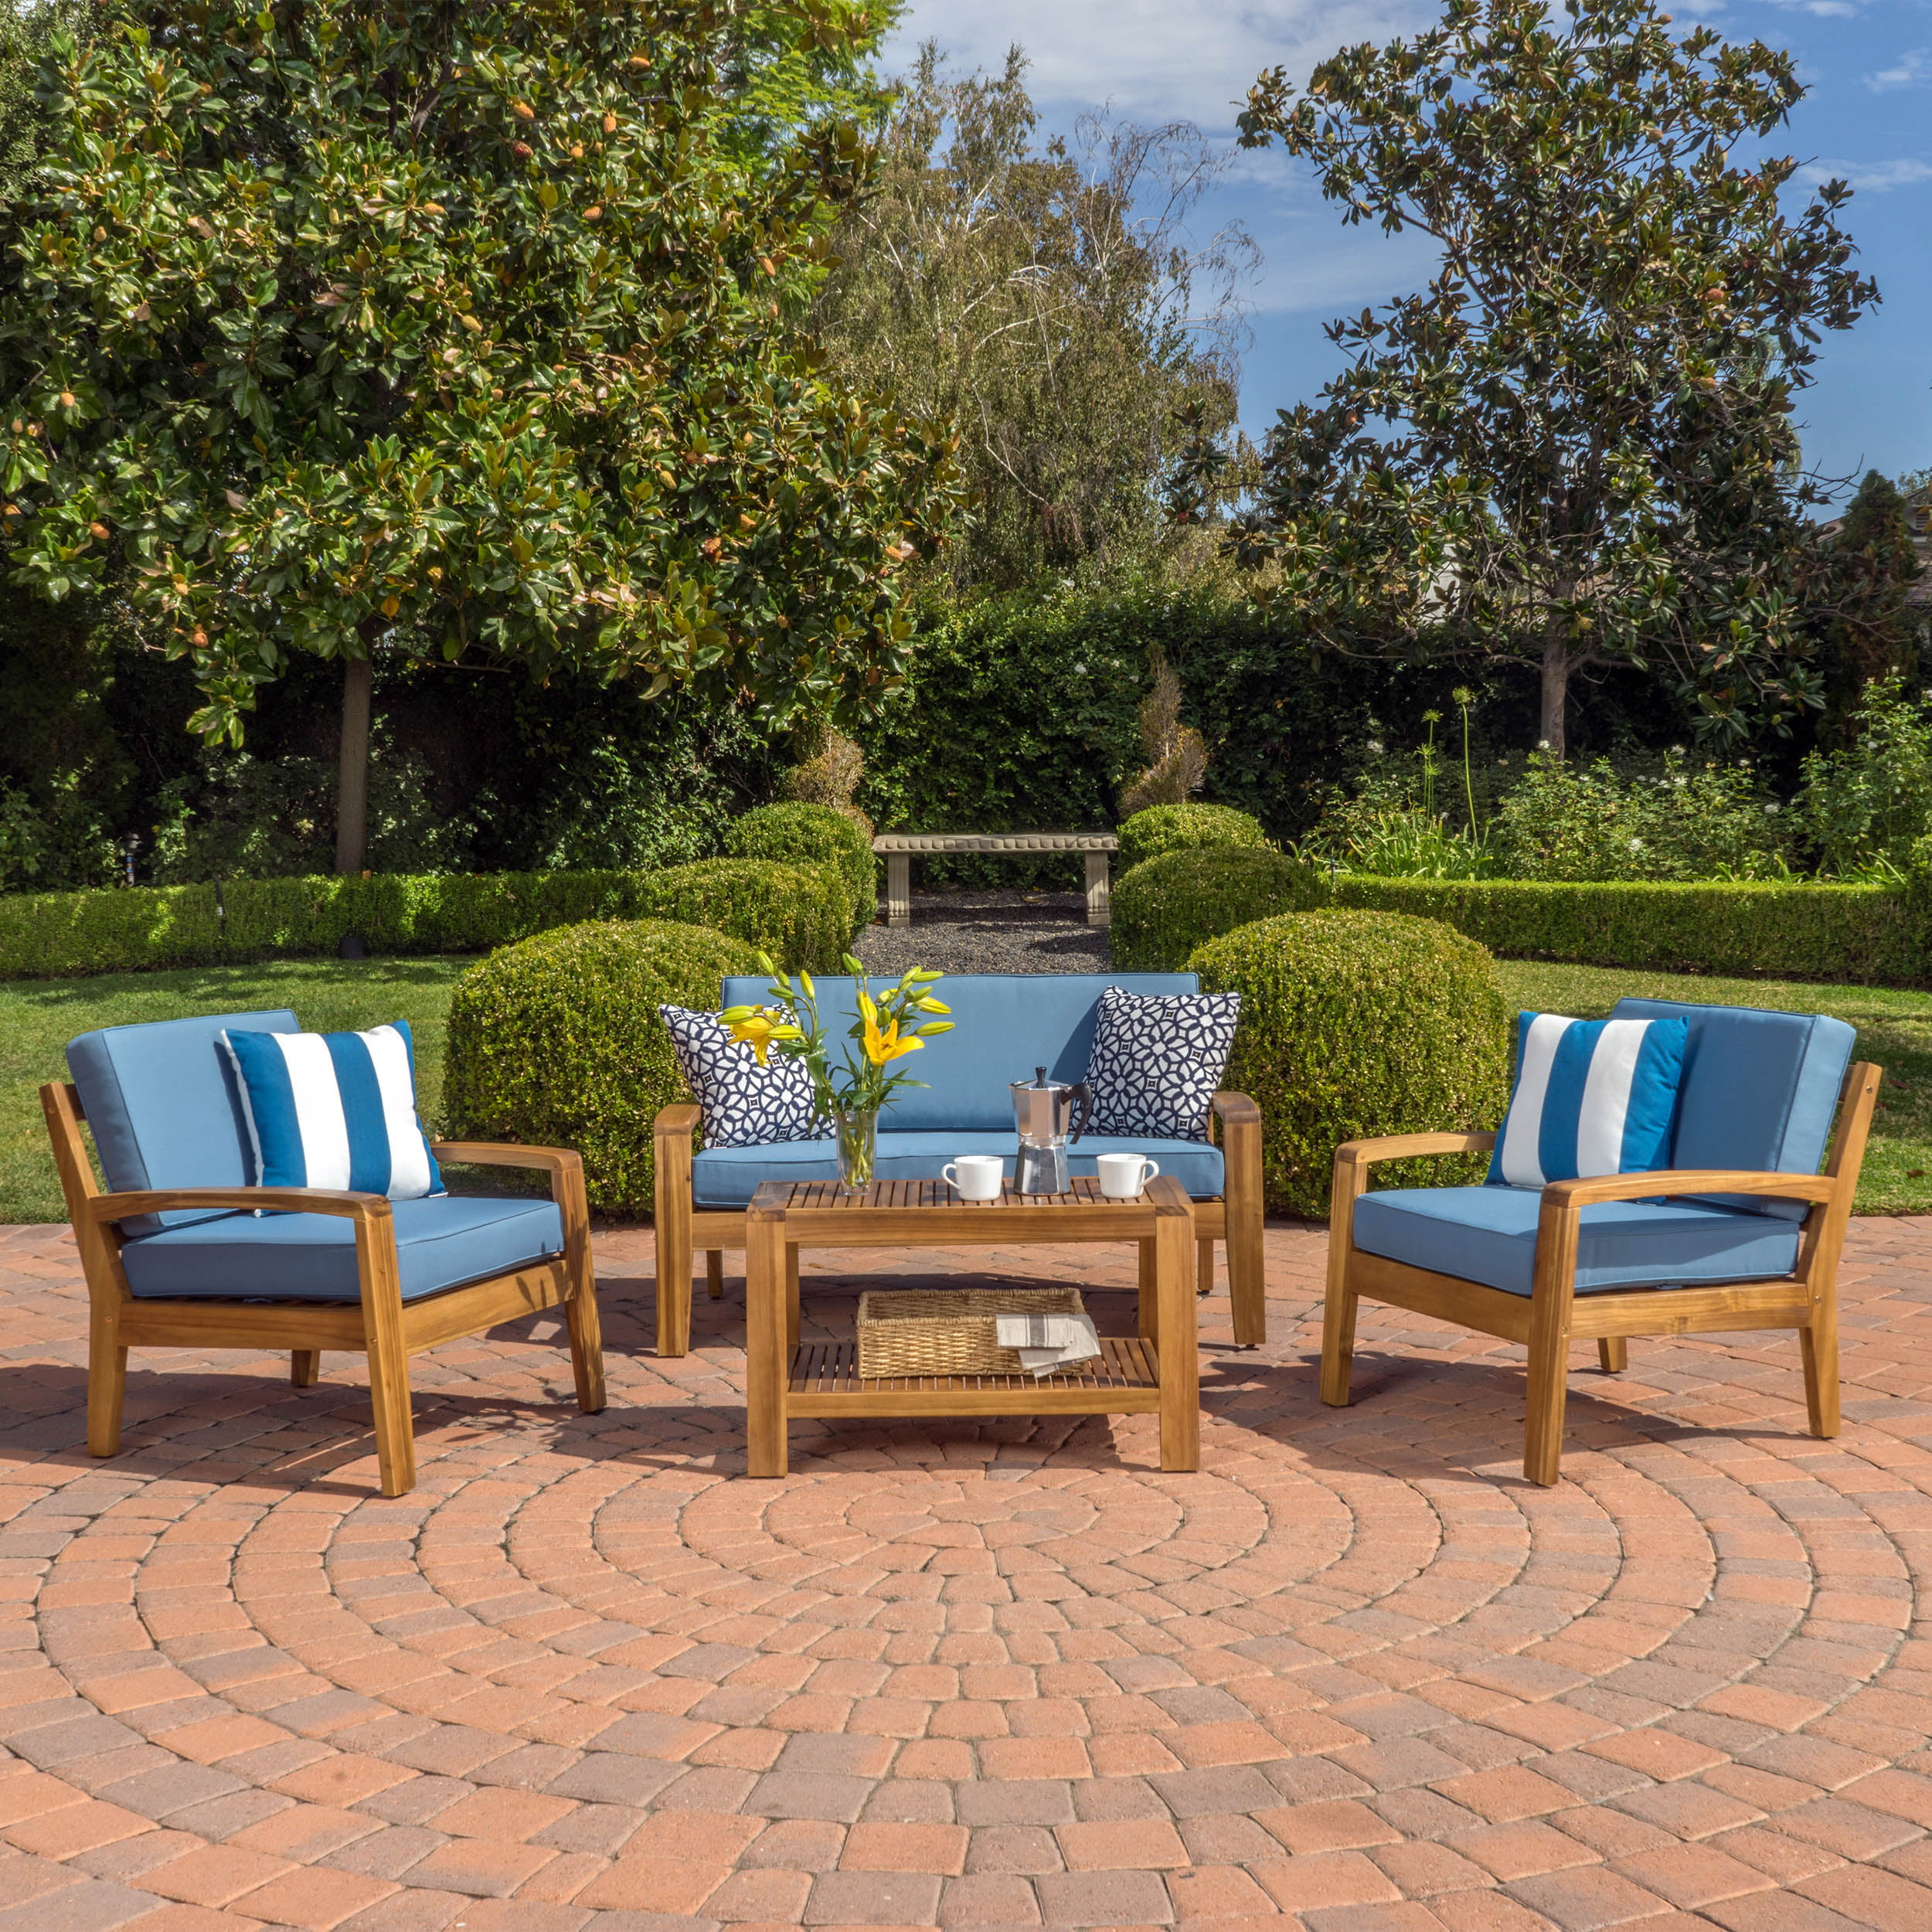 Parma 4 Piece Outdoor Wood Patio Furniture Chat Set with